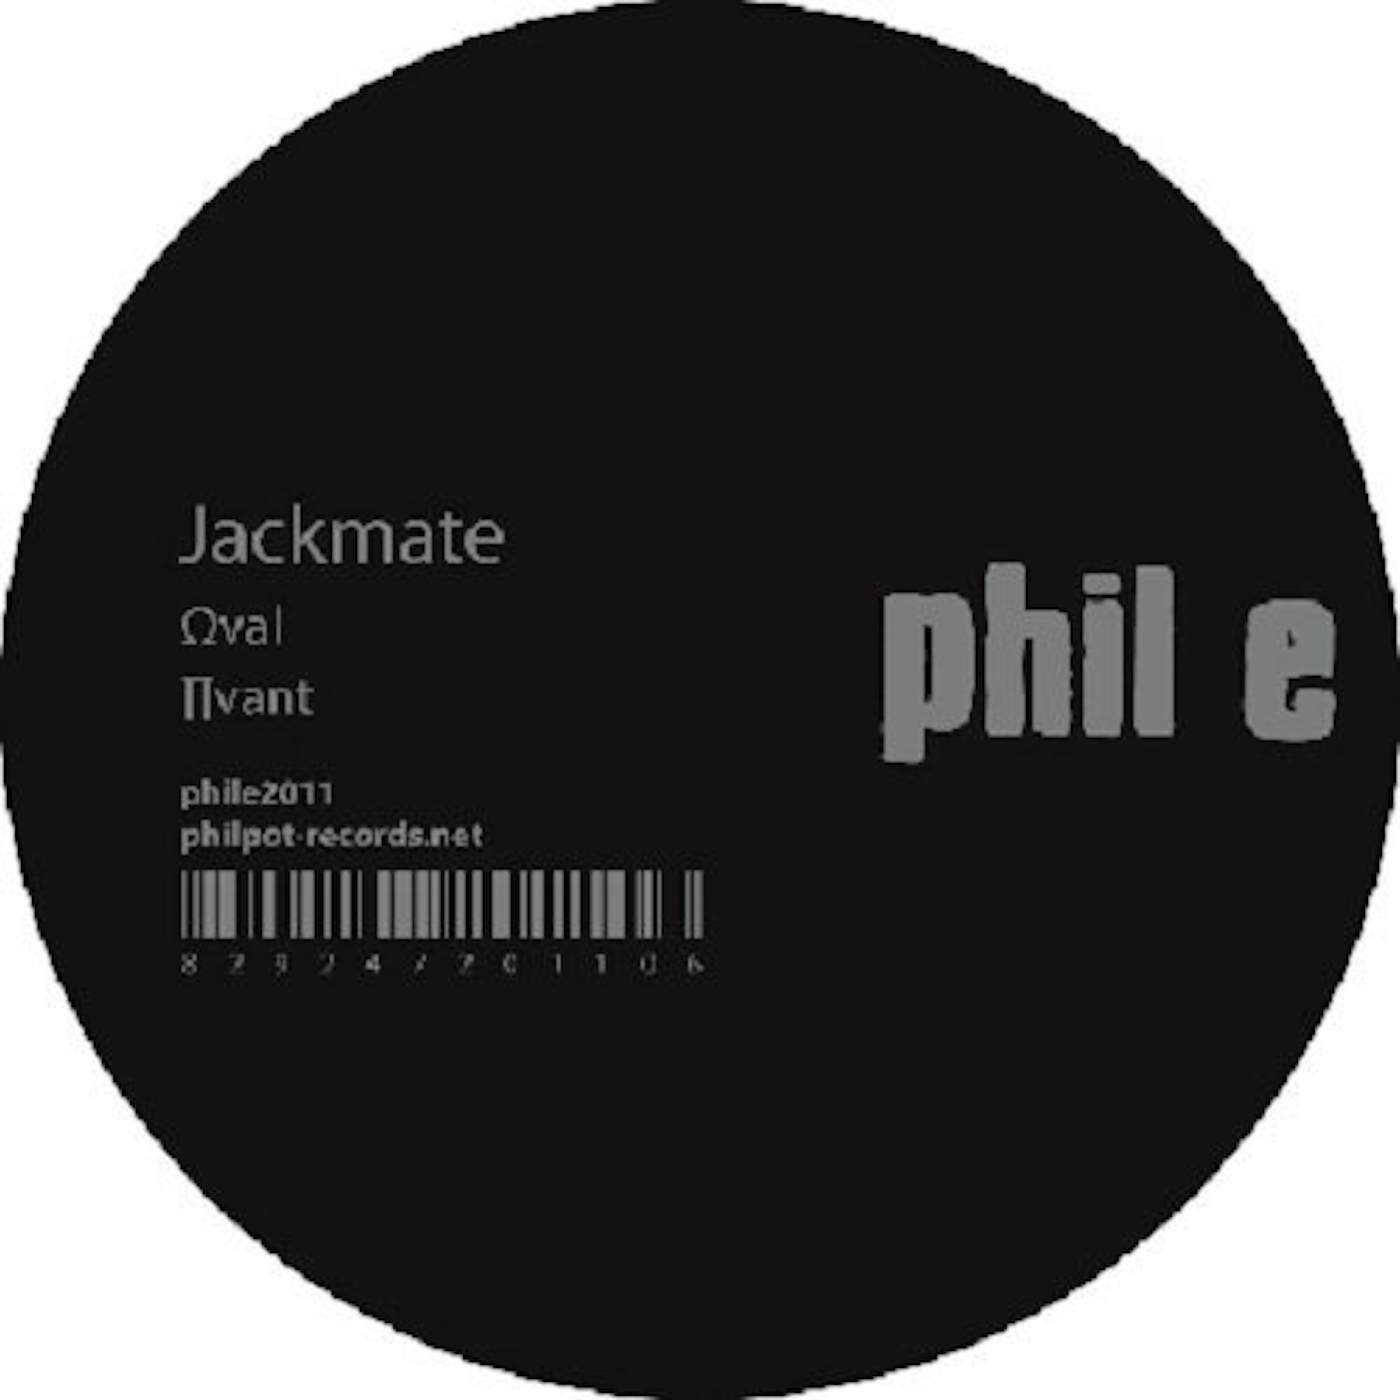 Jackmate Oval Vinyl Record